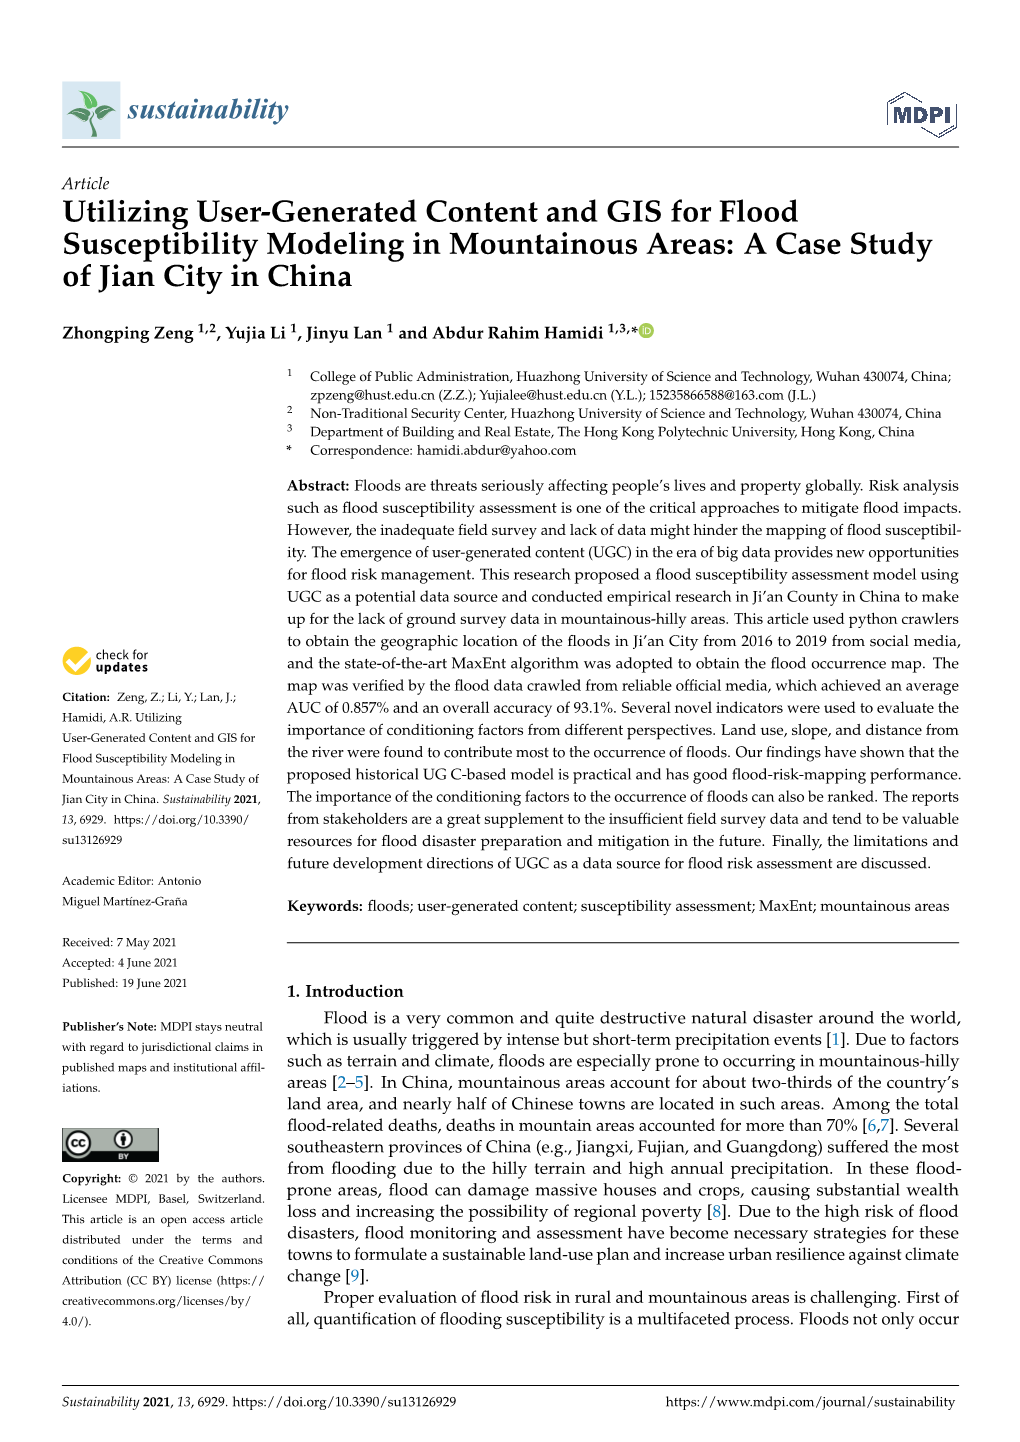 Utilizing User-Generated Content and GIS for Flood Susceptibility Modeling in Mountainous Areas: a Case Study of Jian City in China